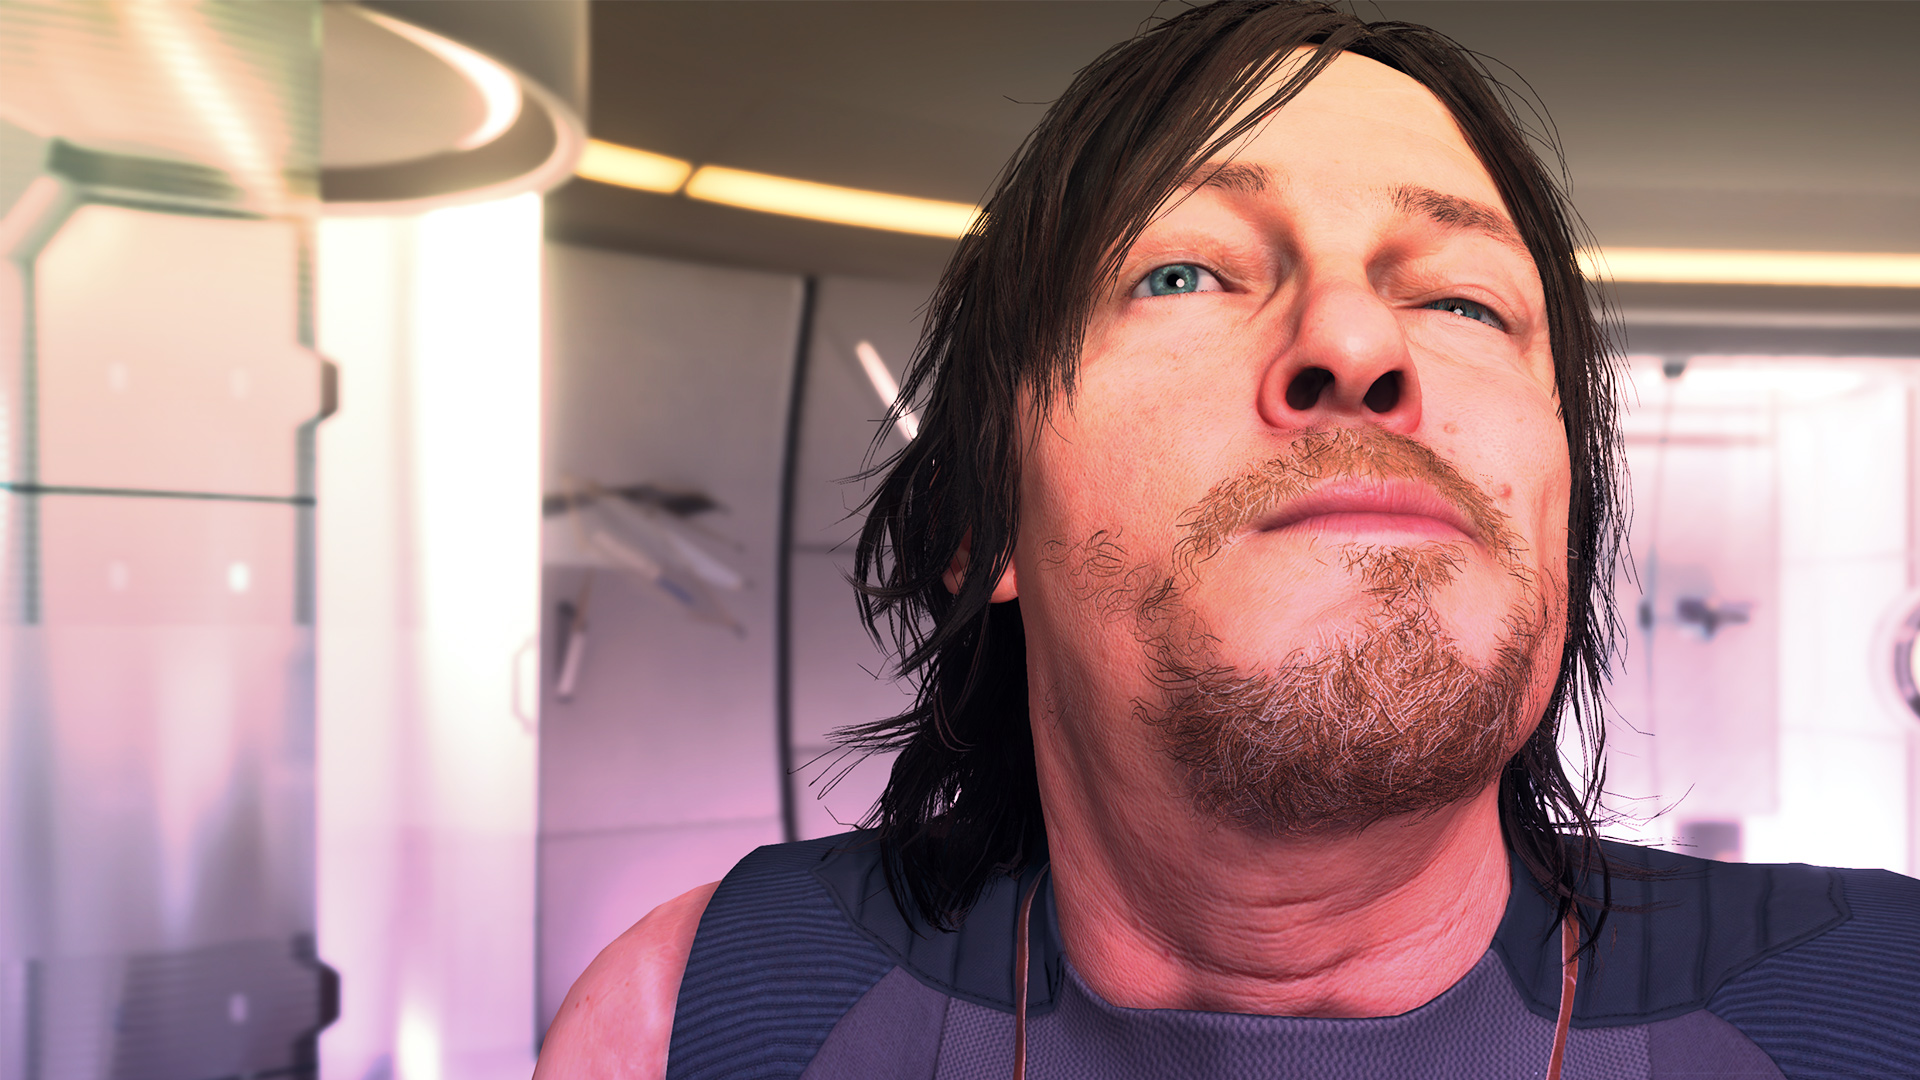 Death Stranding protagonist Sam makes a face in a mirror